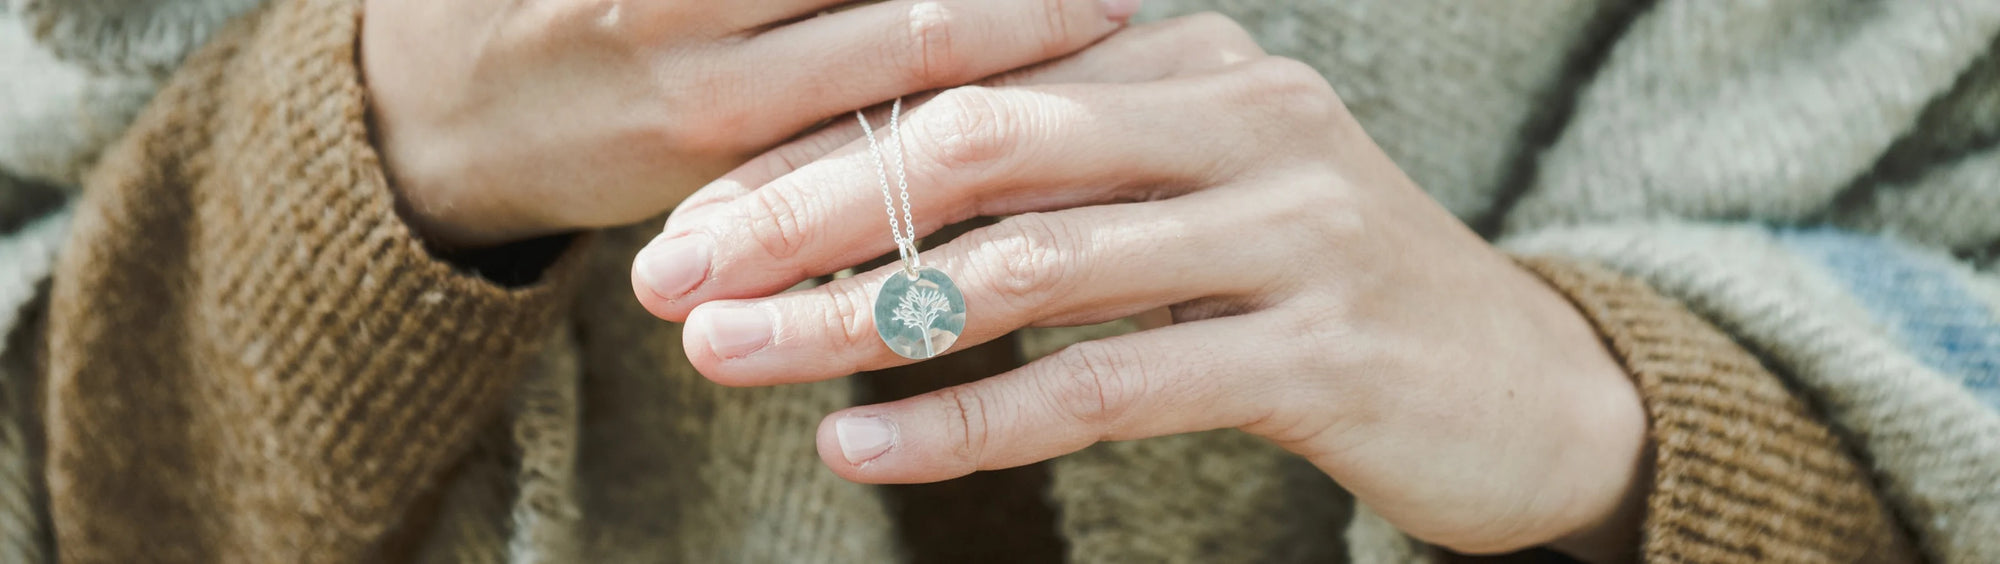 Hands holding a silver necklace with a clear gem pendant, close-up view.